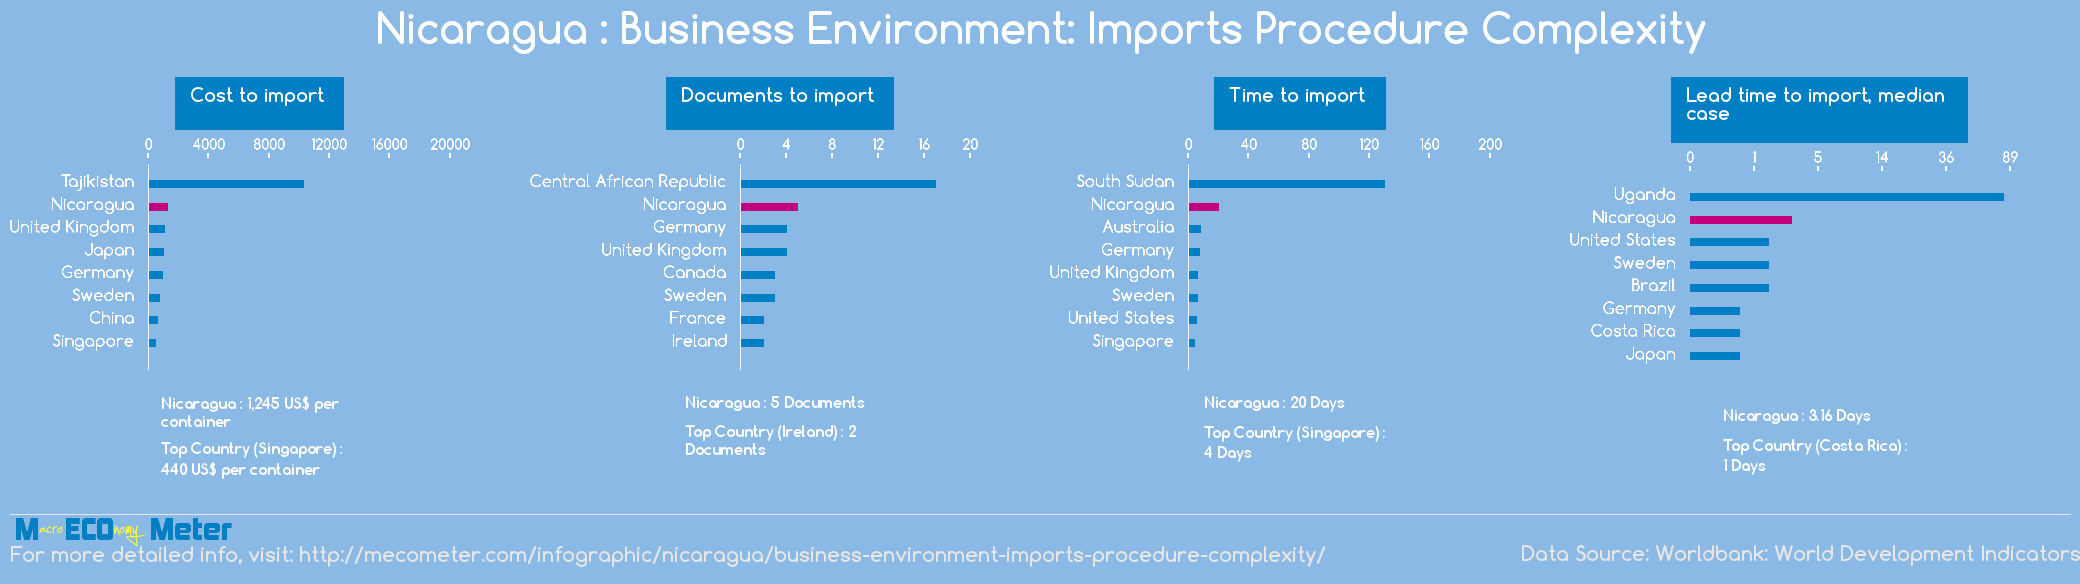 Nicaragua : Business Environment: Imports Procedure Complexity